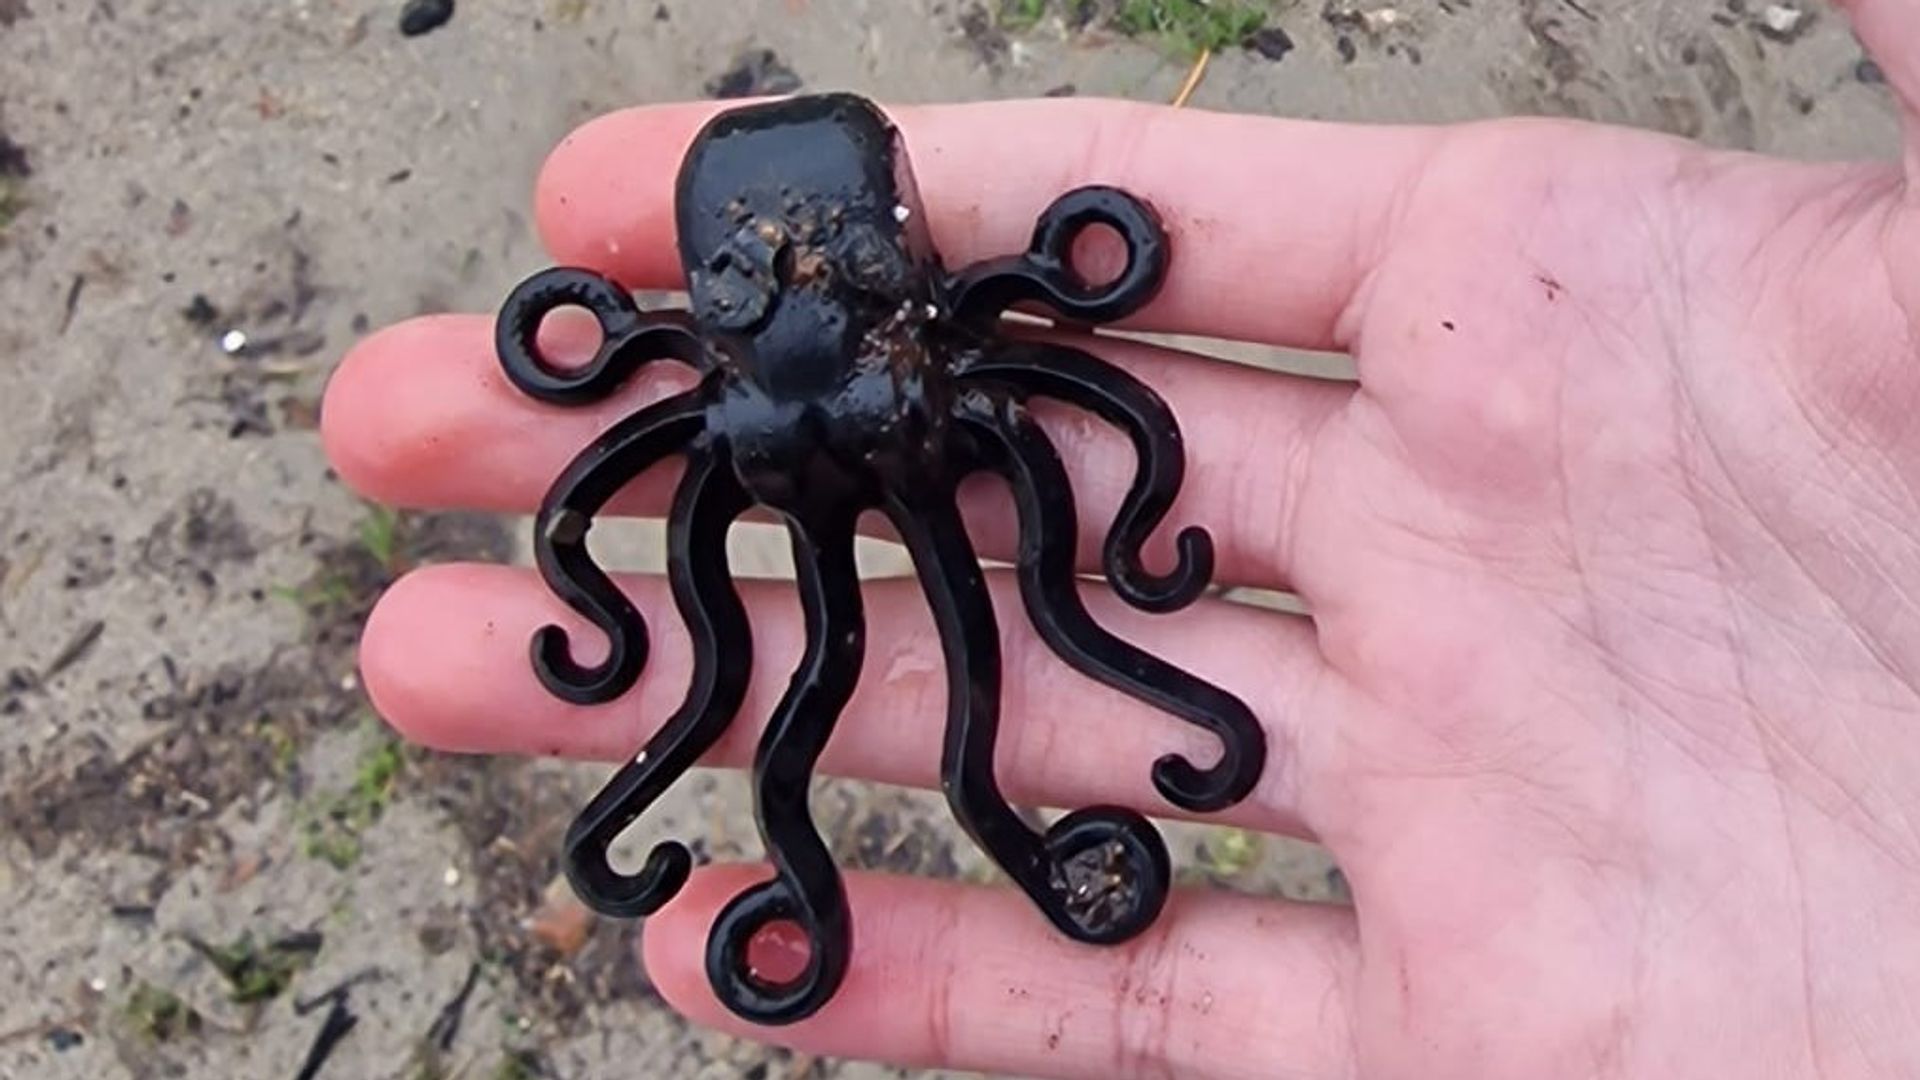 Boy, 13, finds 'holy grail' Lego octopus piece from sea spillage in 1997